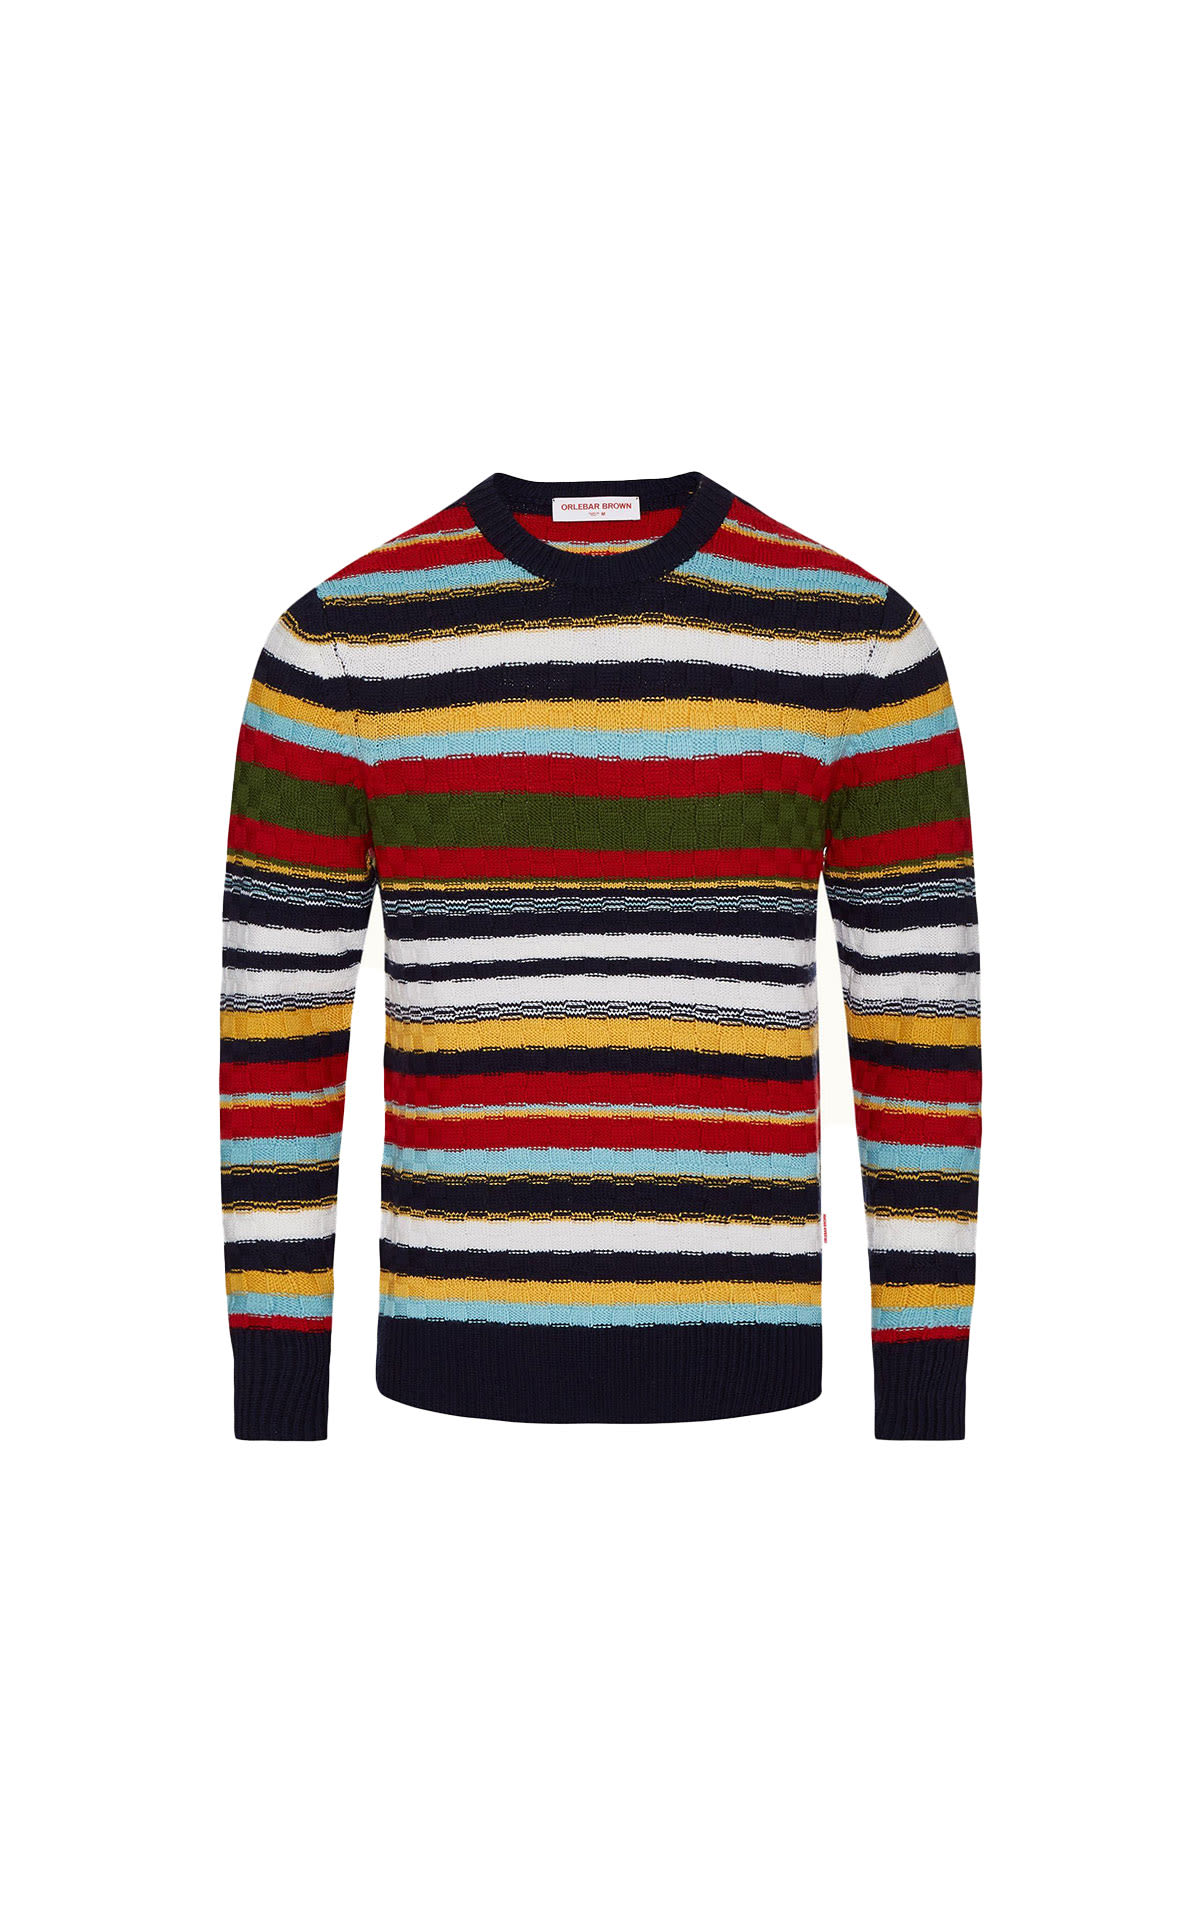 Orlebar Brown Ethan Augustus stripe - volcanic red/dune  from Bicester Village